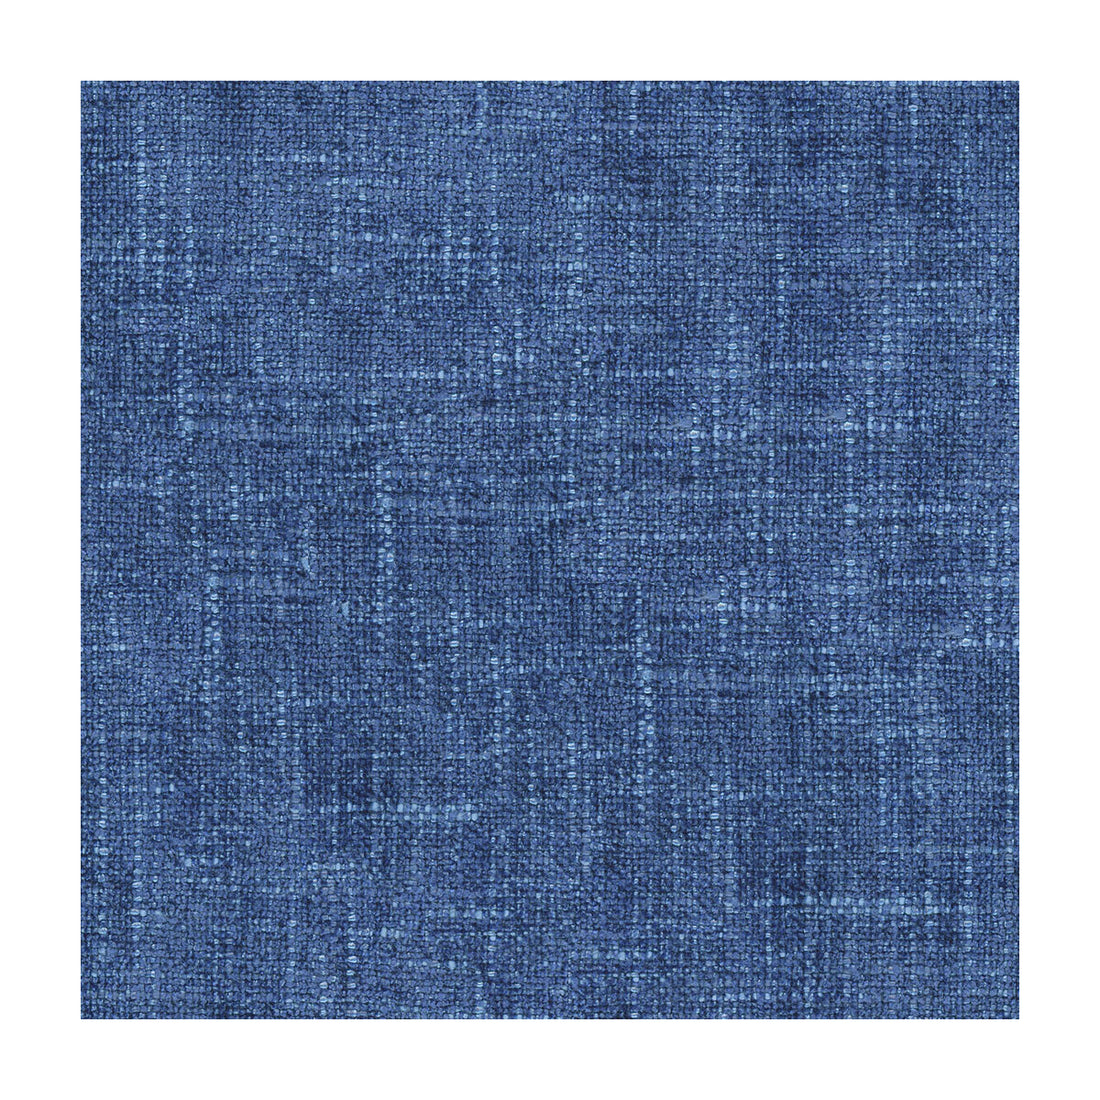 Allstar fabric in indigo color - pattern 34299.5.0 - by Kravet Basics in the Sarah Richardson Harmony collection